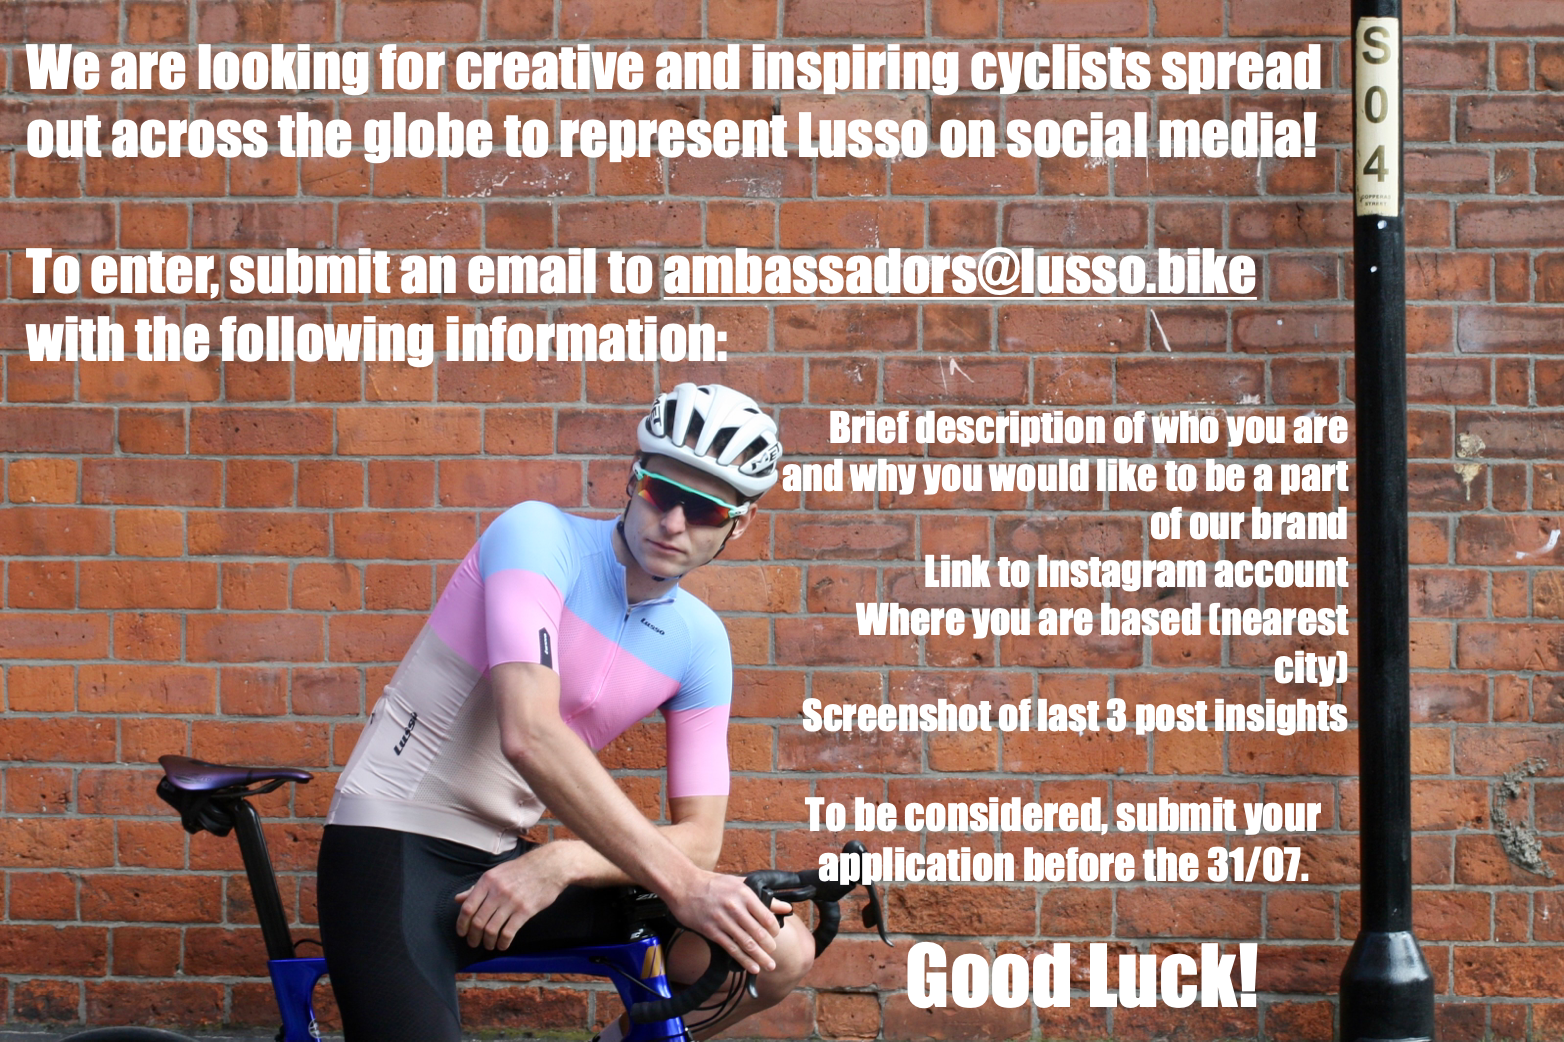 We are looking for creative and inspiring cyclists spread out across the globe to represent Lusso on social media!   To enter, submit an email to ambassadors@lusso.bike with the following information:  Brief description of who you are and why you would like to be a part of our brand. Link to Instagram account Where you are based (nearest city) Screenshot of post insights of last 3 posts  To be considered, submit your application before the 31/07.  Good luck!